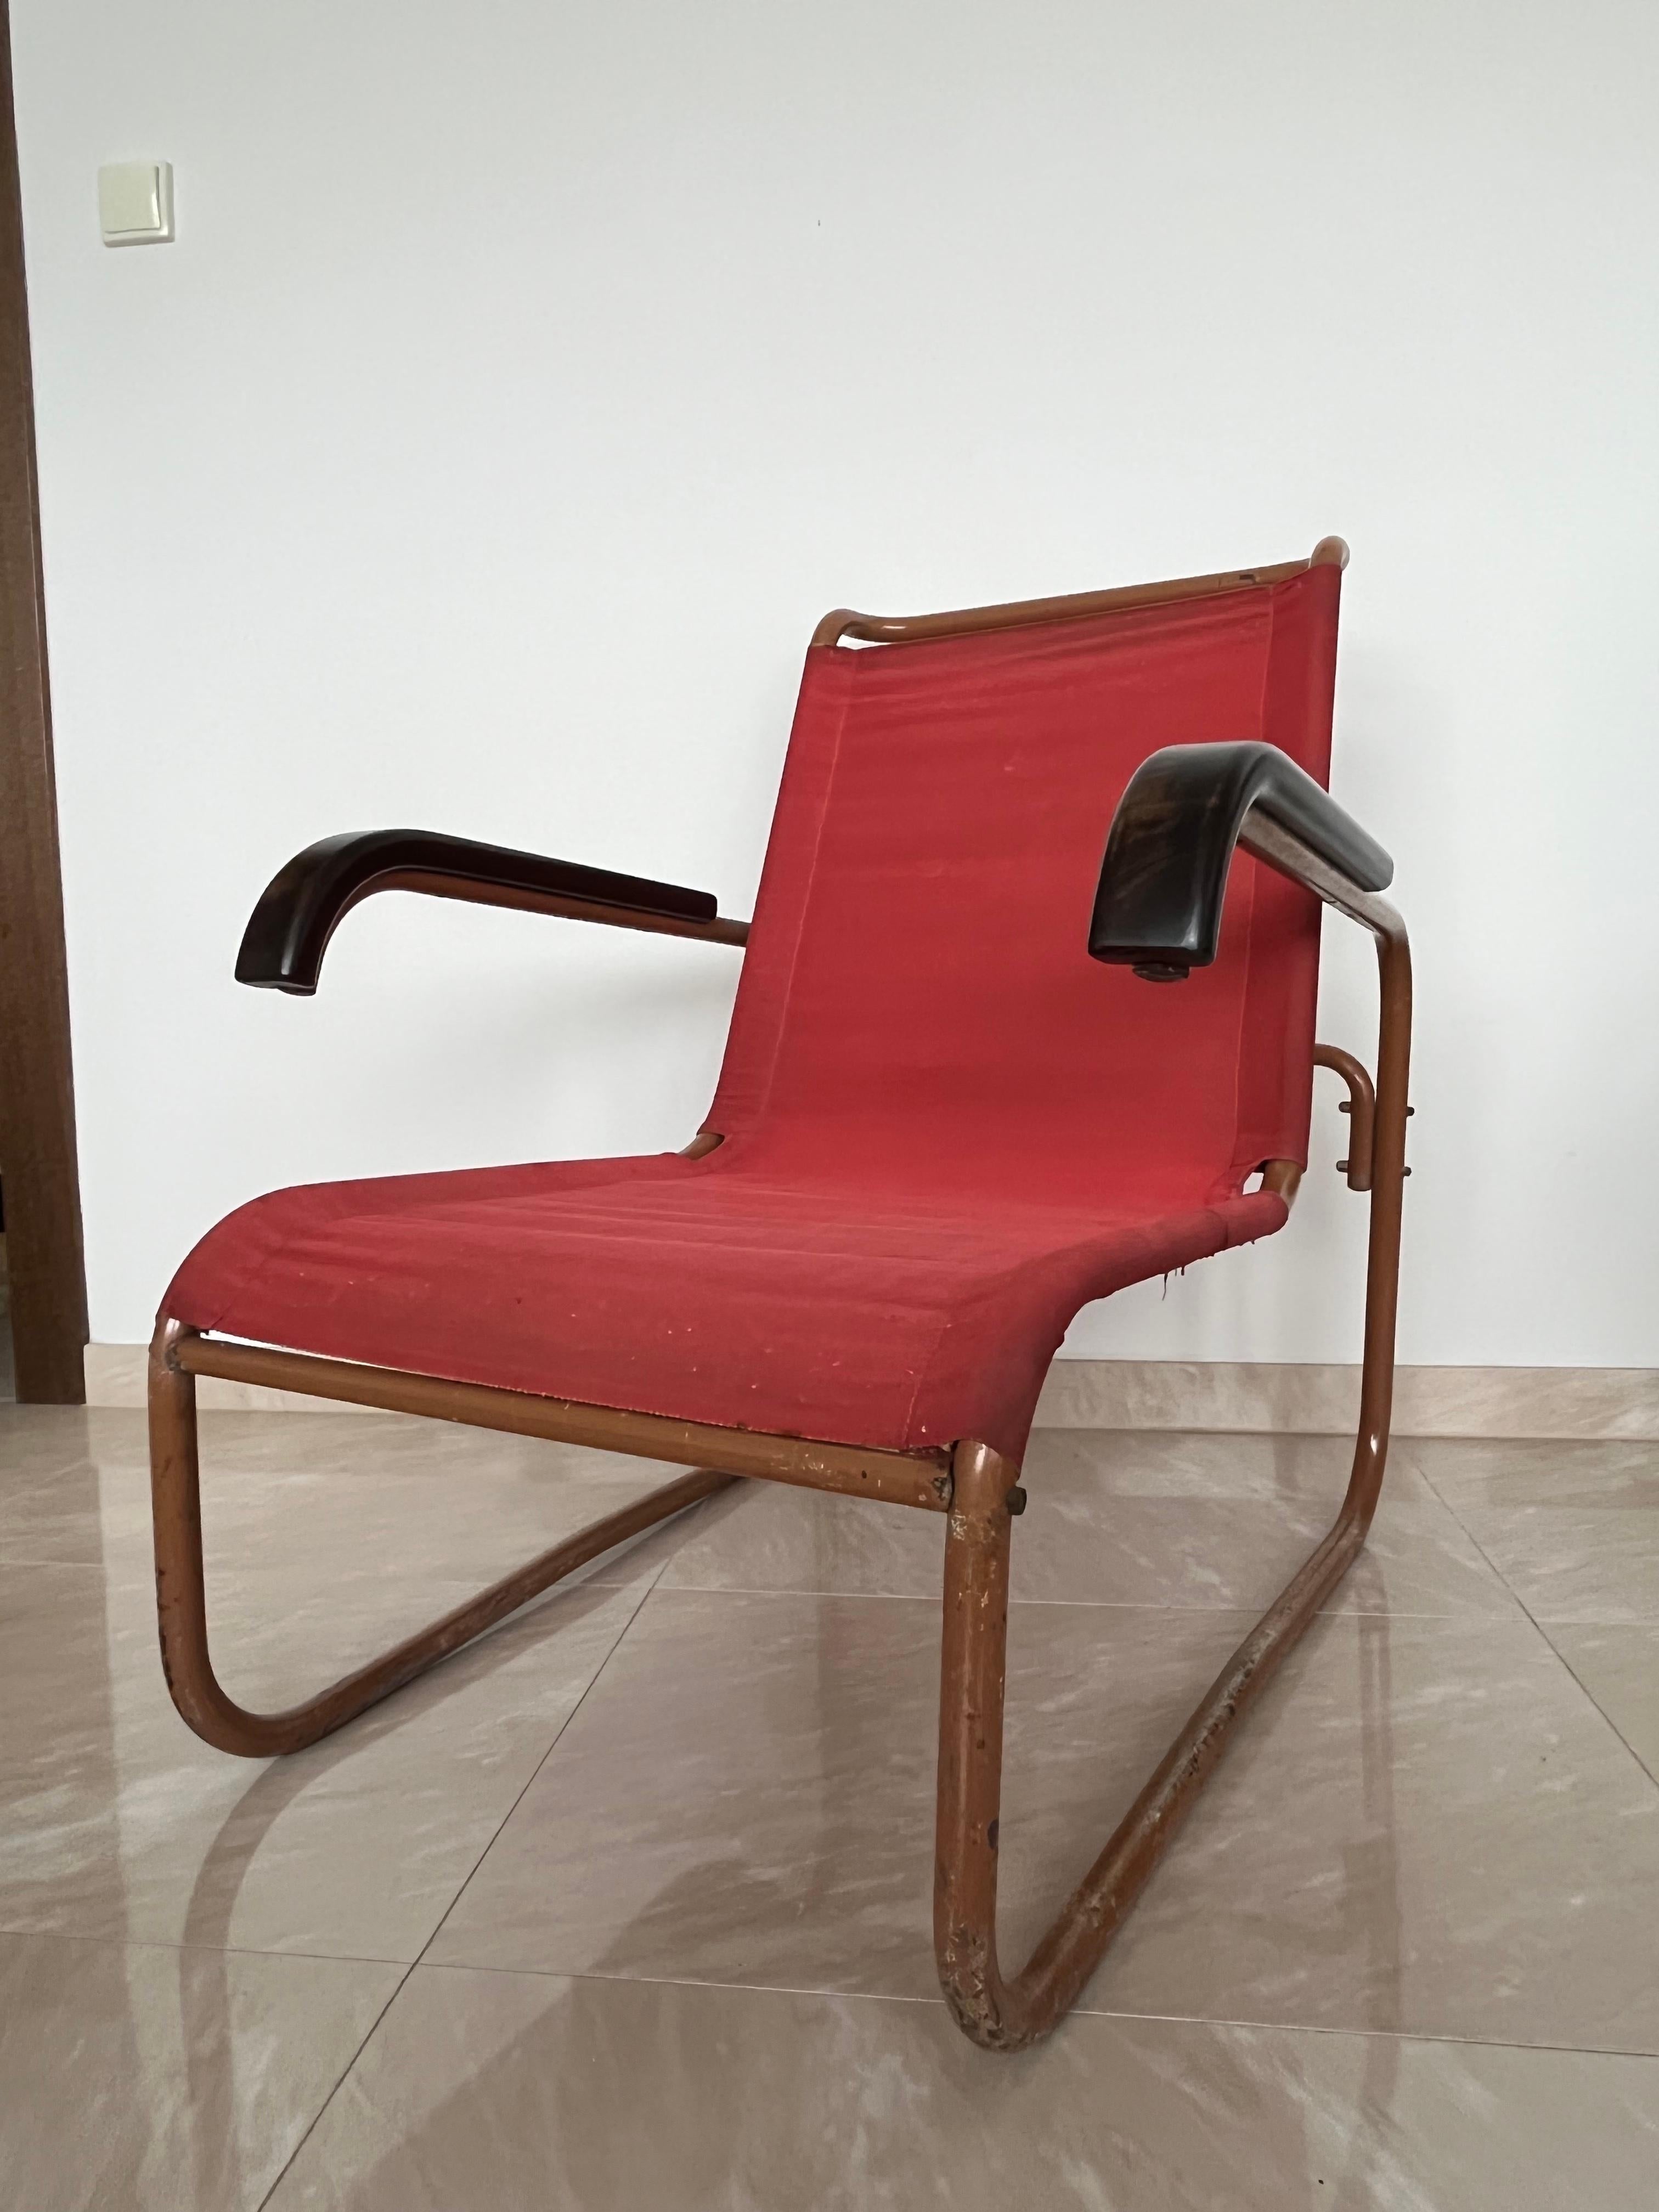 - Czechoslovakia, Mücke-Melder, licensed by Thonet 
- It is not possible to buy lacquered tubular steel furniture
- Before 1930, earliest model, practically unseen
- Original red eisengarn, iron fabric, perfect condition, original screws
- Covered